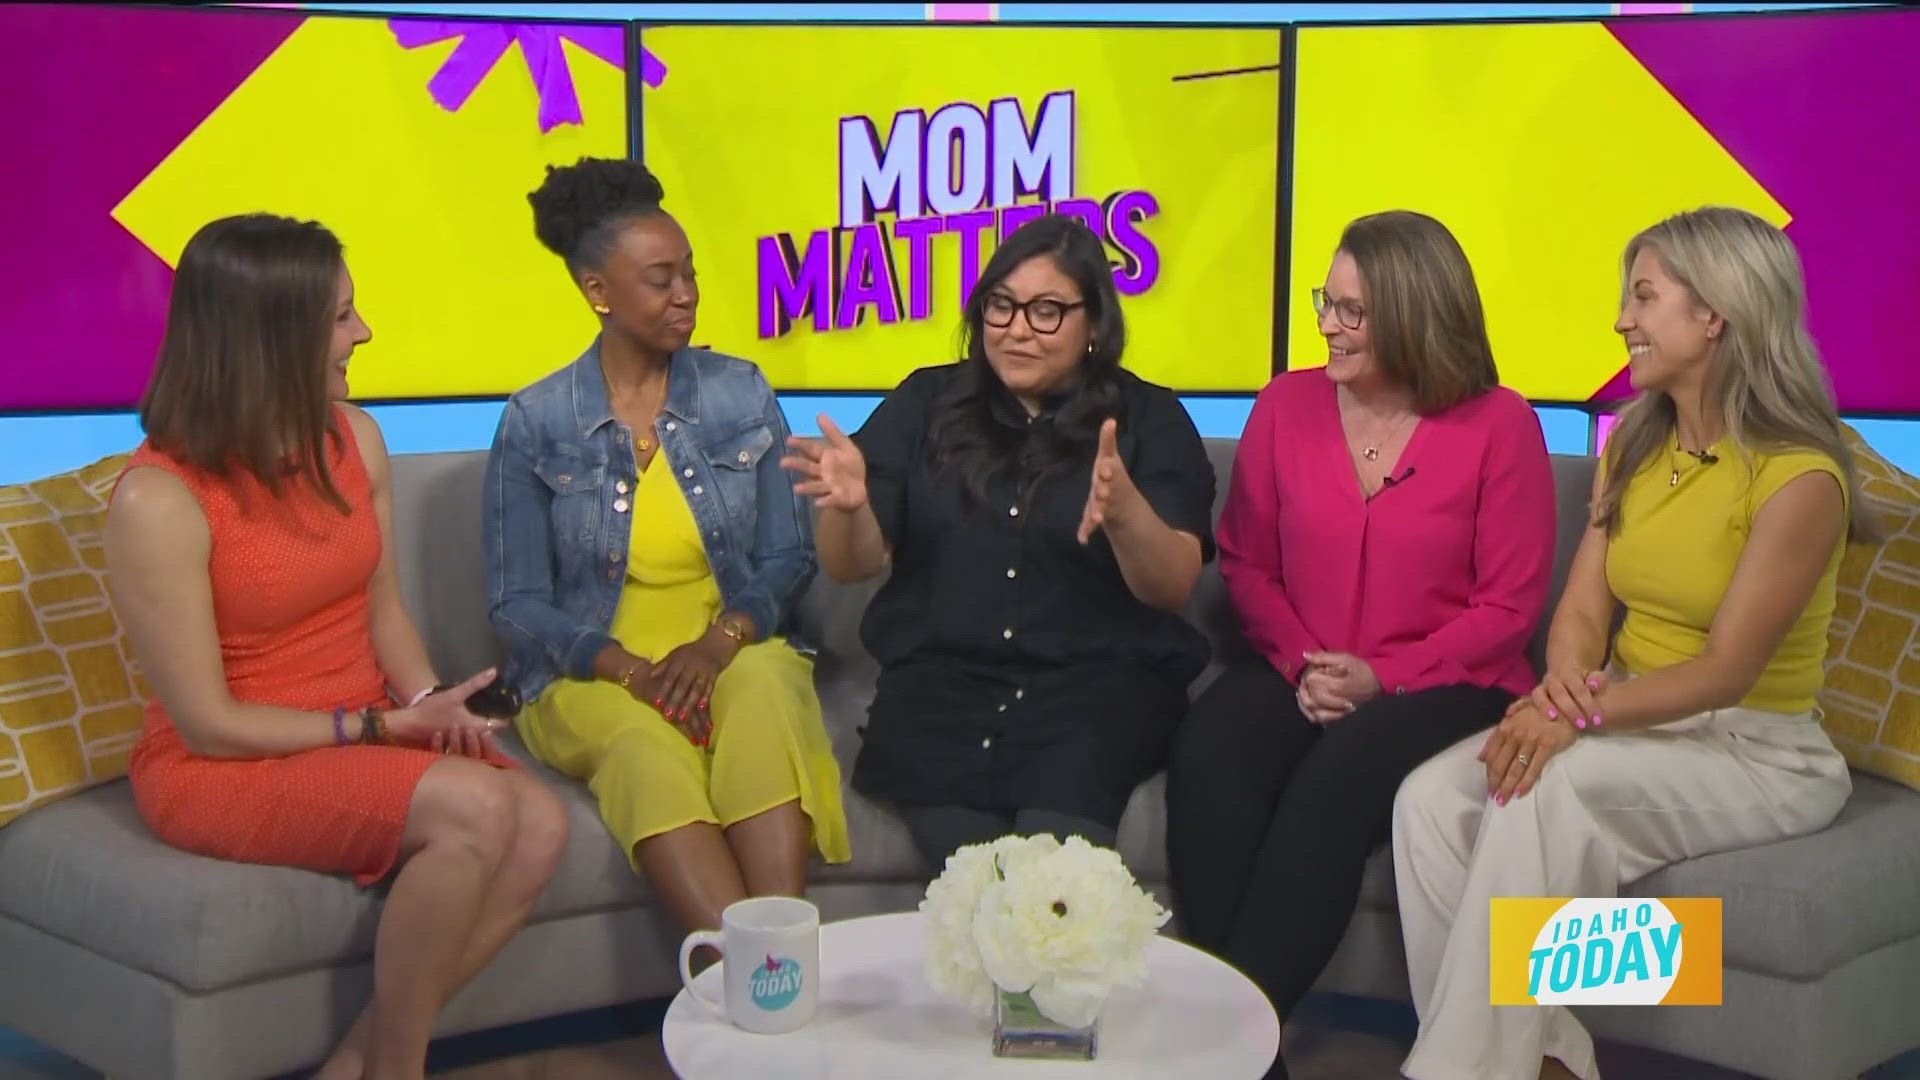 Mom Matters on Idaho Today is a series created by moms for moms as a safe place to share, collaborate and support one another.